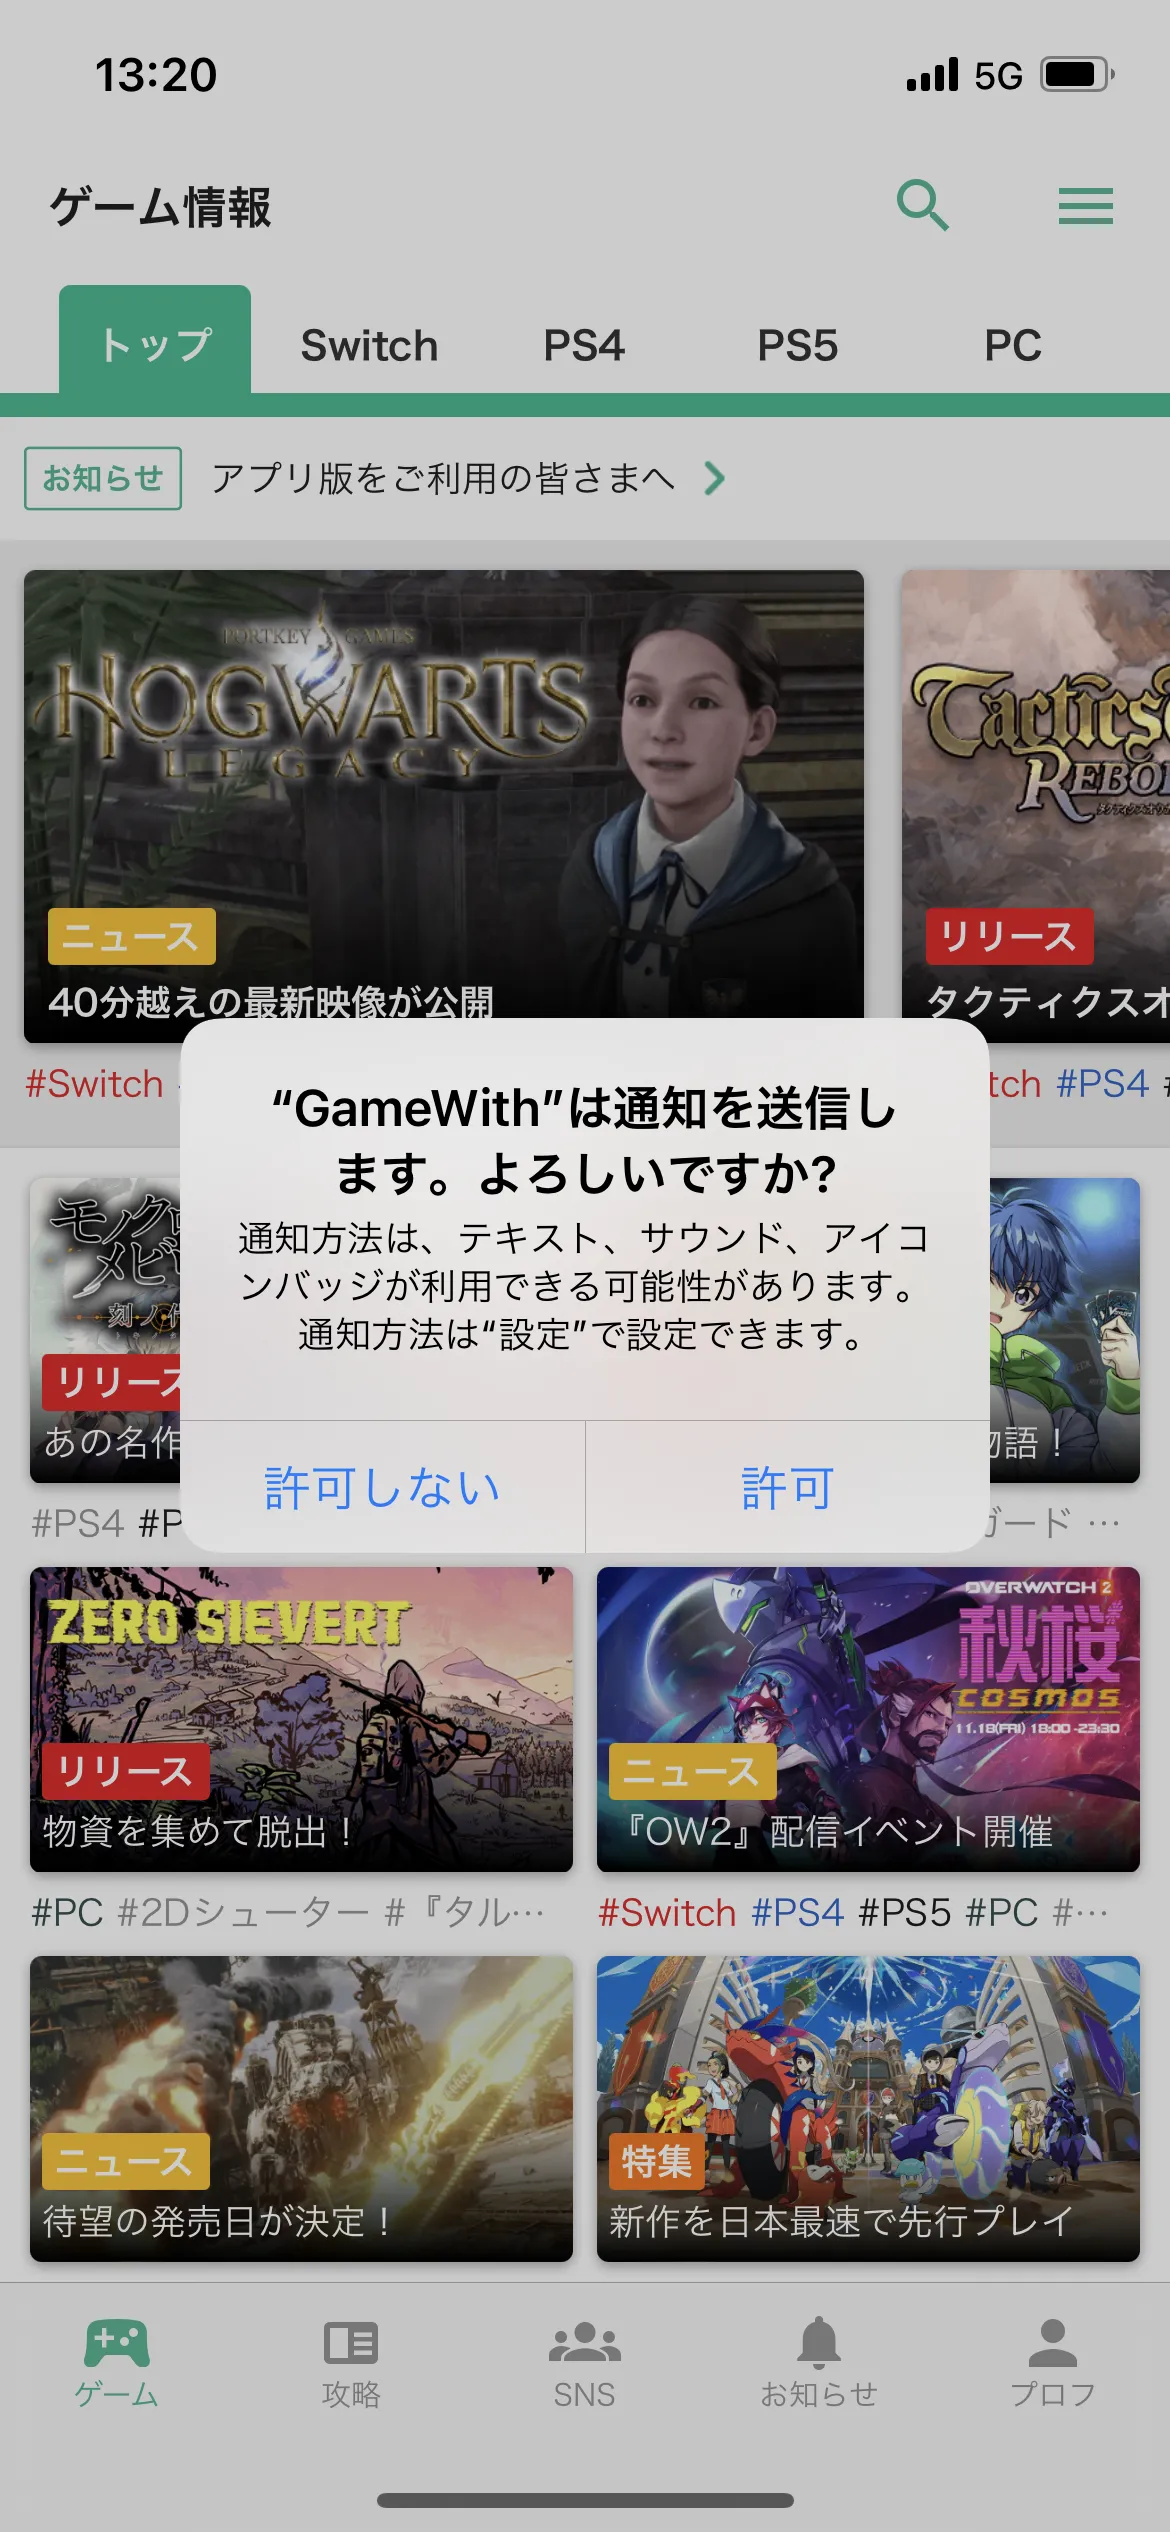 GameWith ゲーム screen